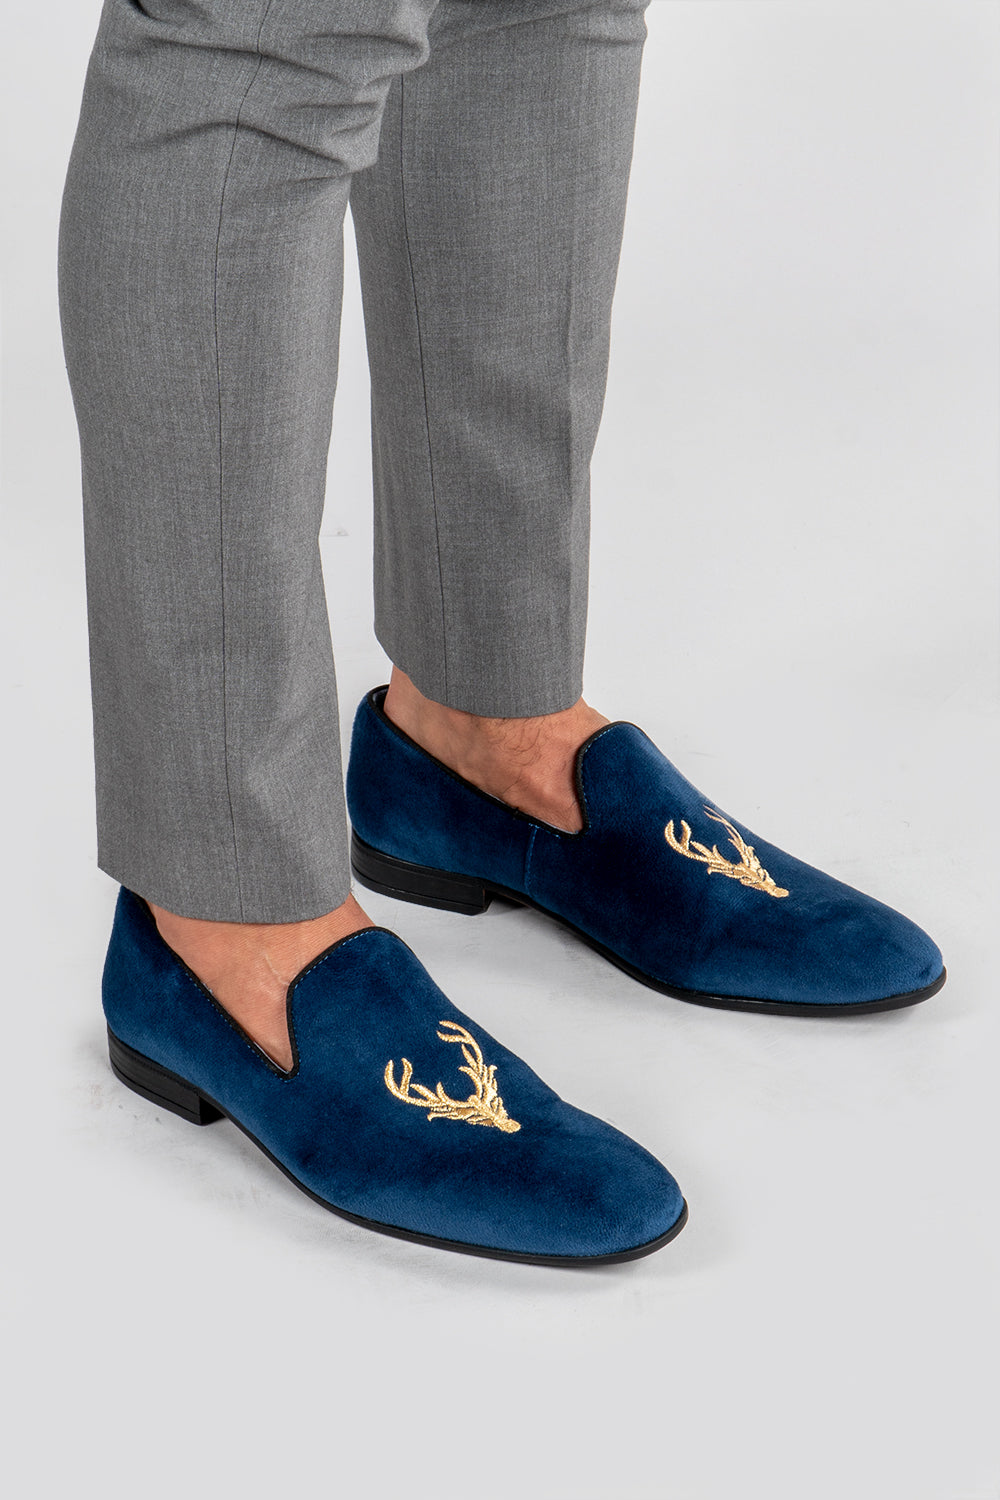 man wearing Men's navy velvet loafers with stag embroidery 